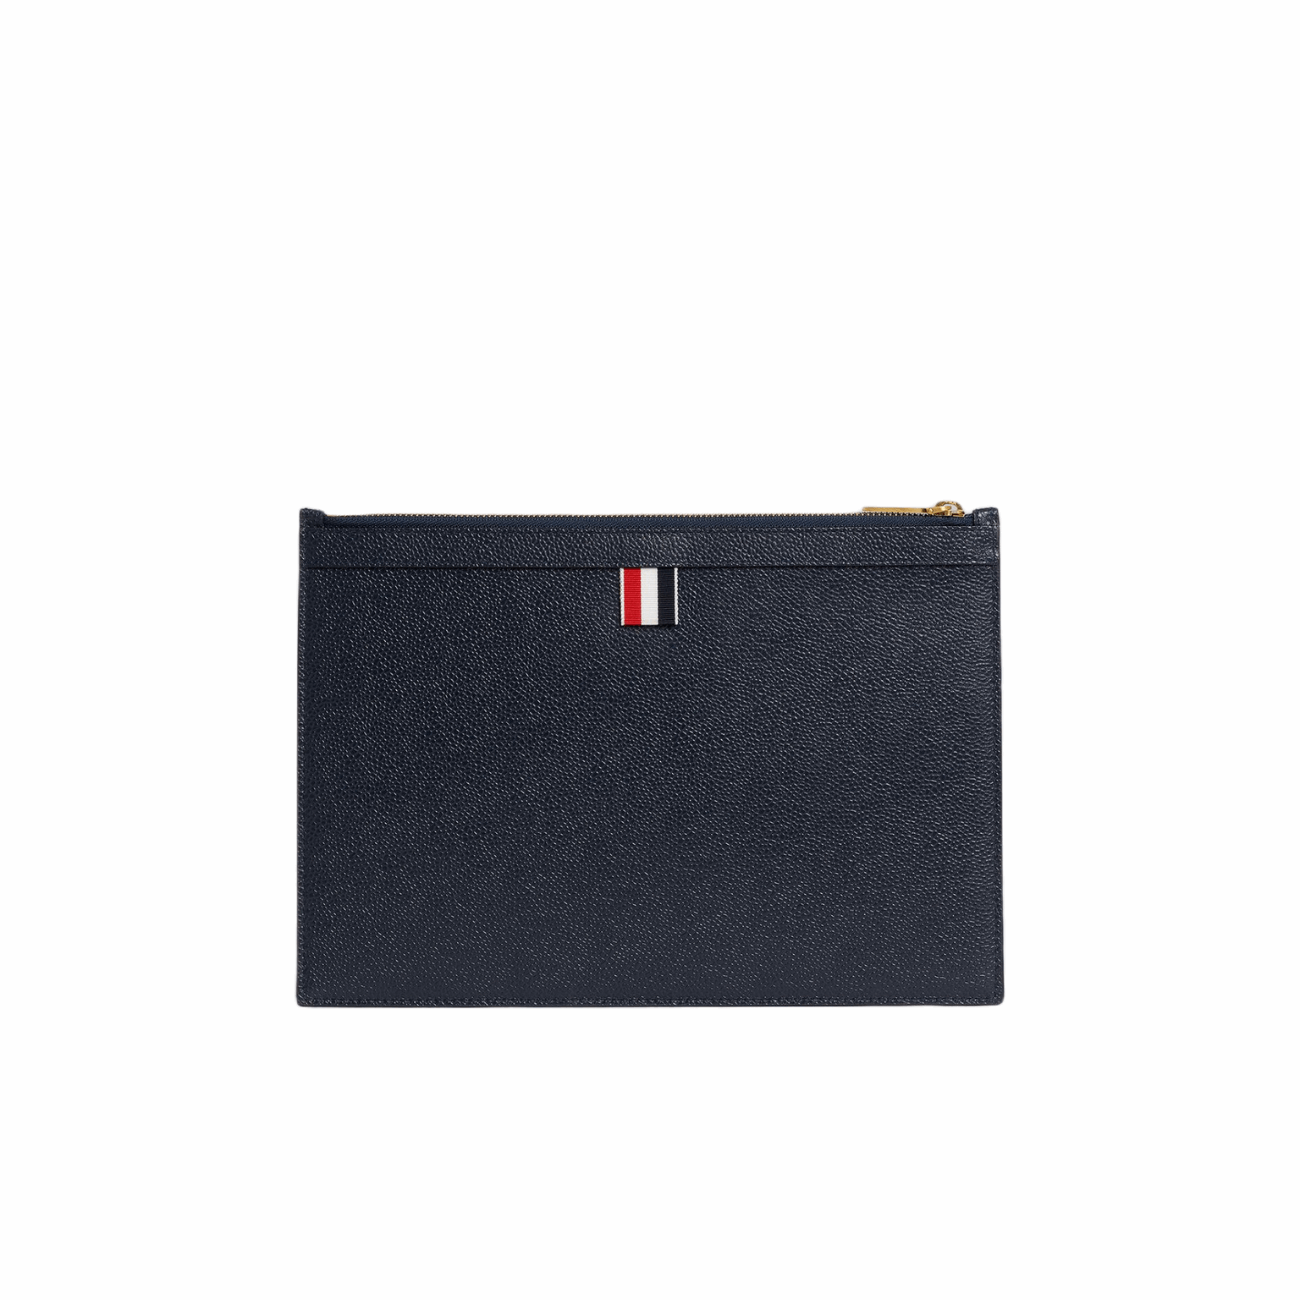 Thom Browne MAC114A00198415 Pebble Grain Leather 4-Bar Small Document Holder, Navy Blue